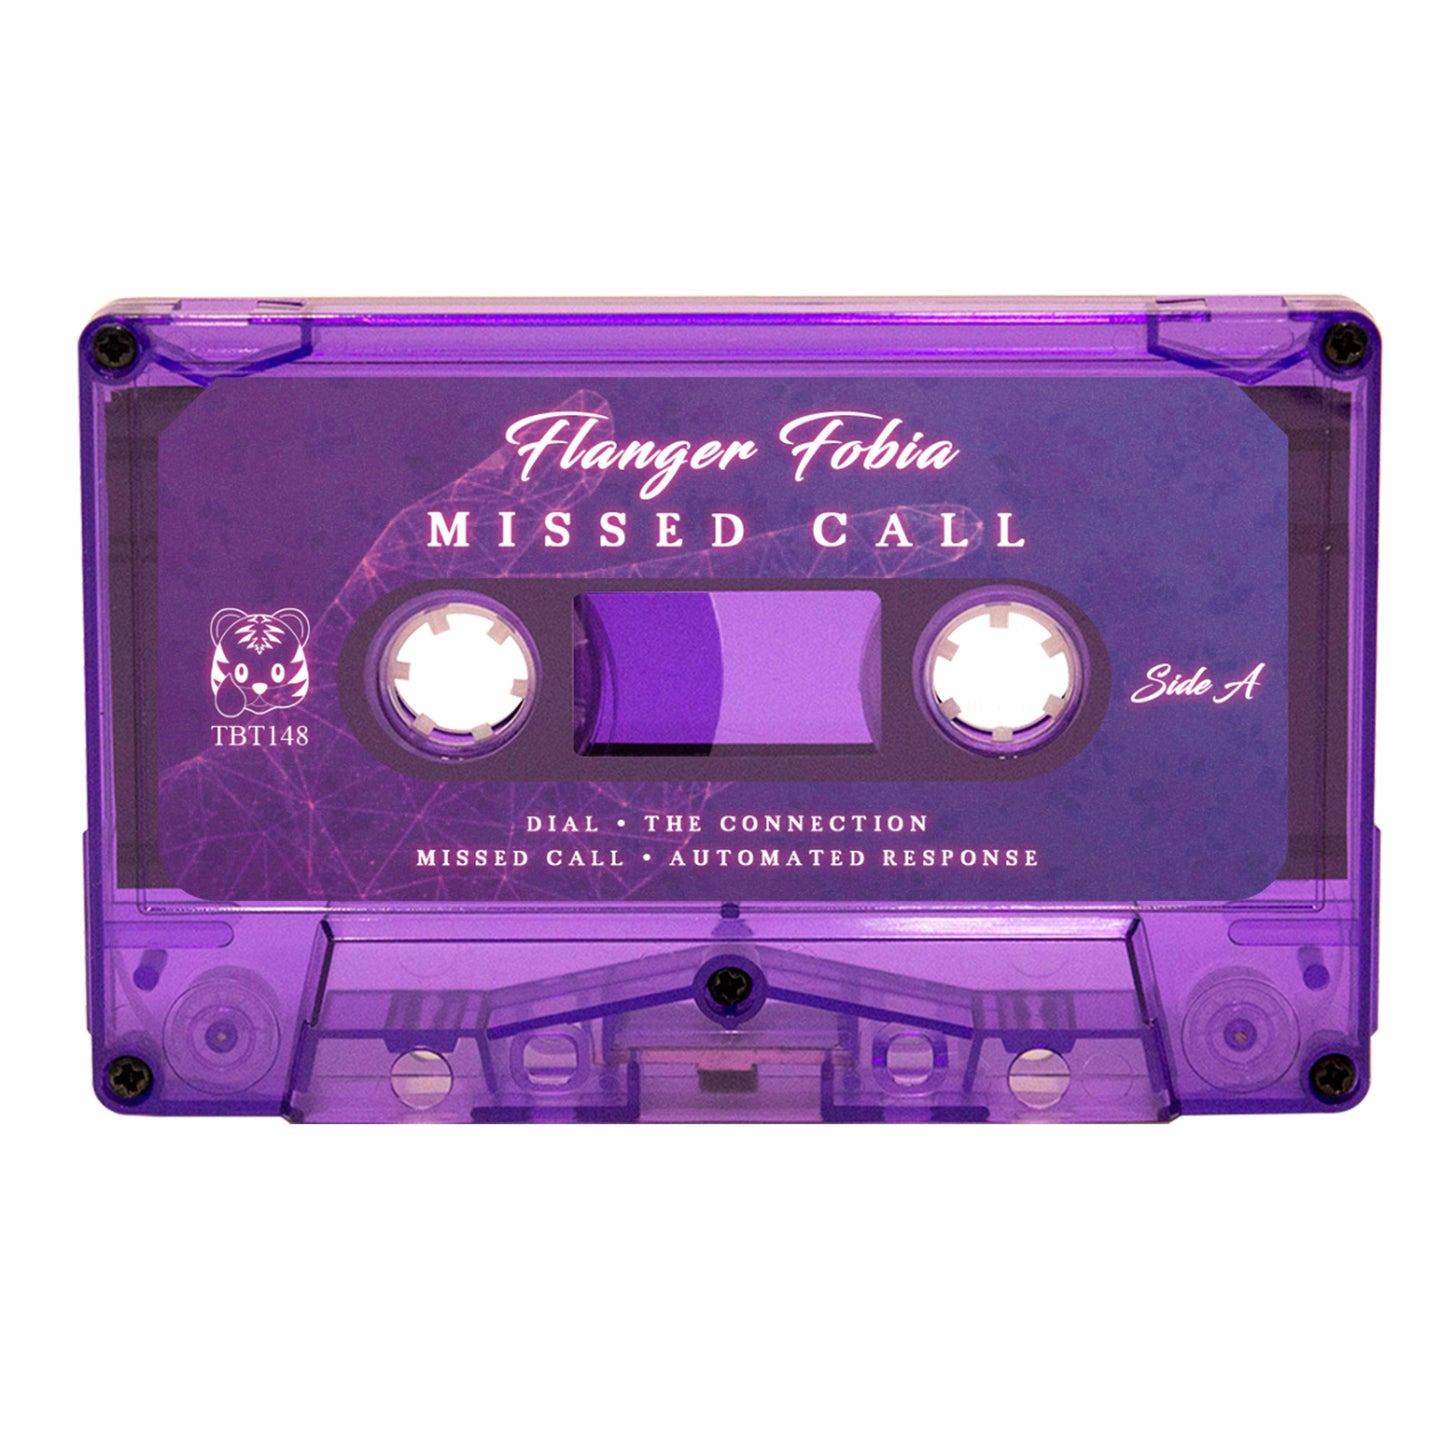 Flanger Fobia - "Missed Call" Limited Edition Cassette Tape